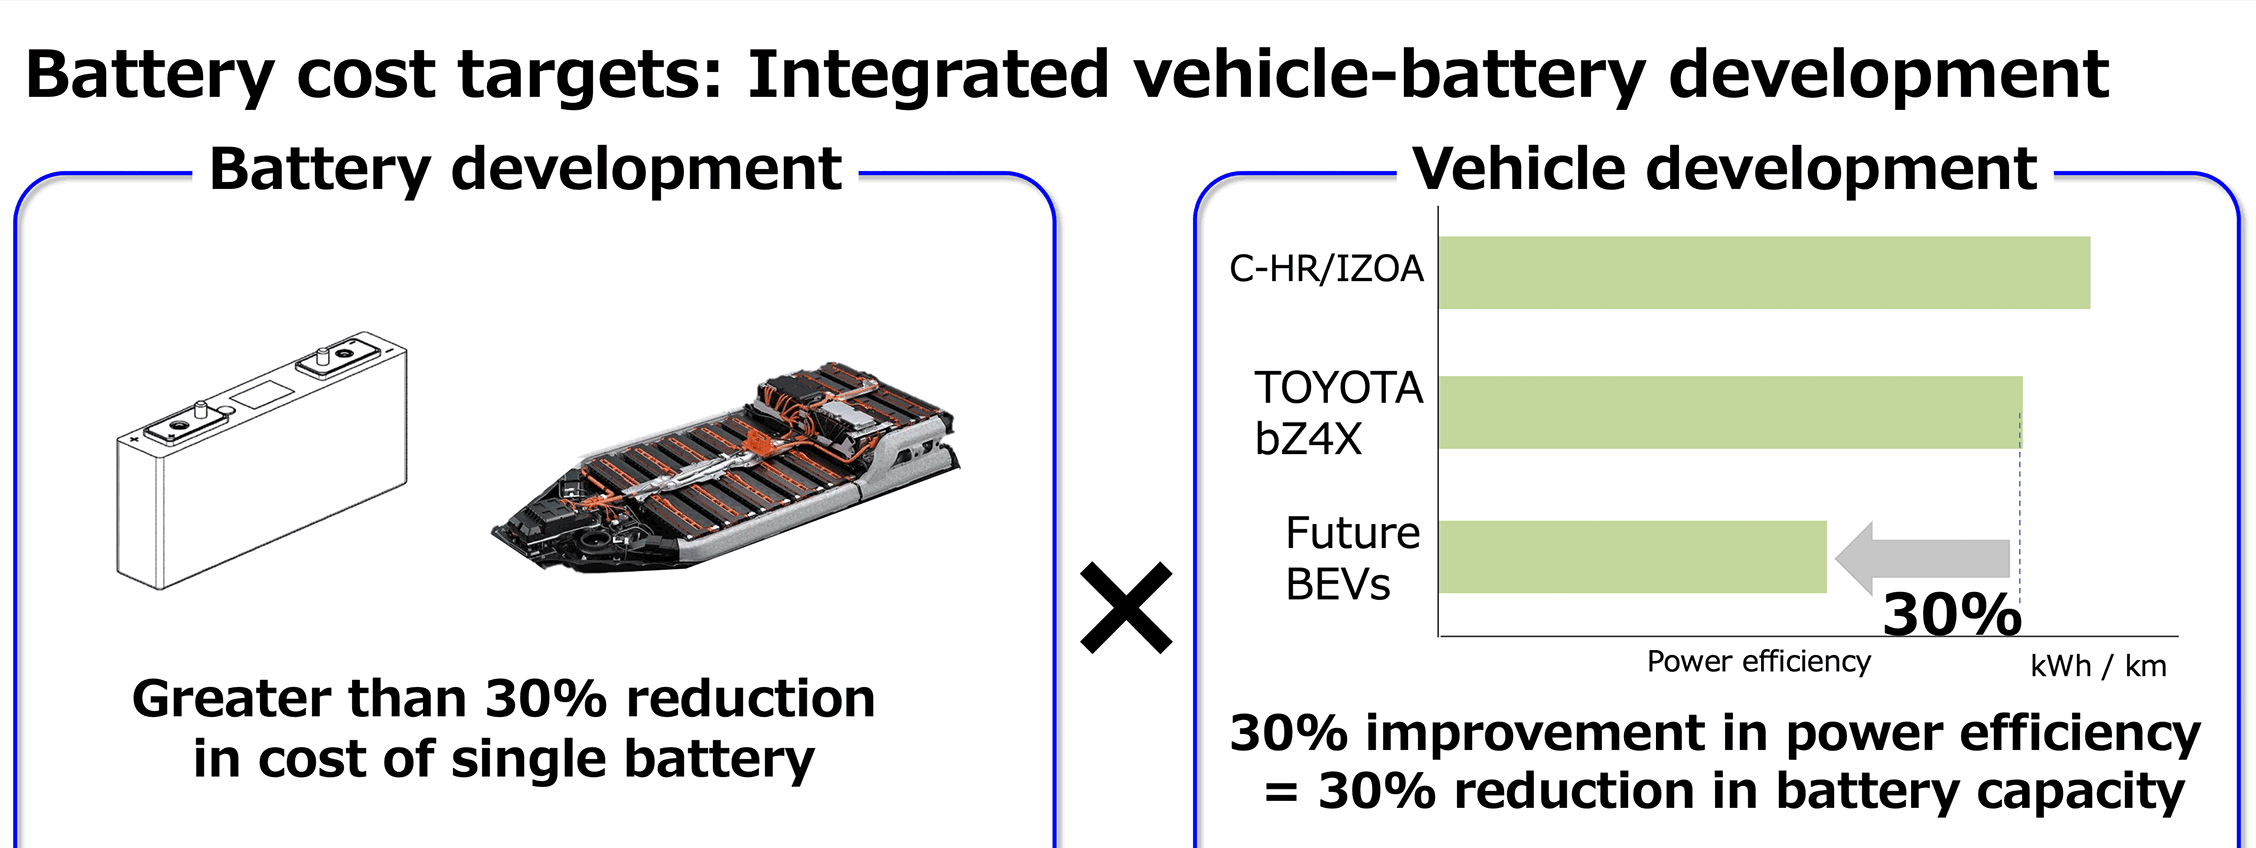 Battery Cost Targets: Integrated Vehicle-battery Development